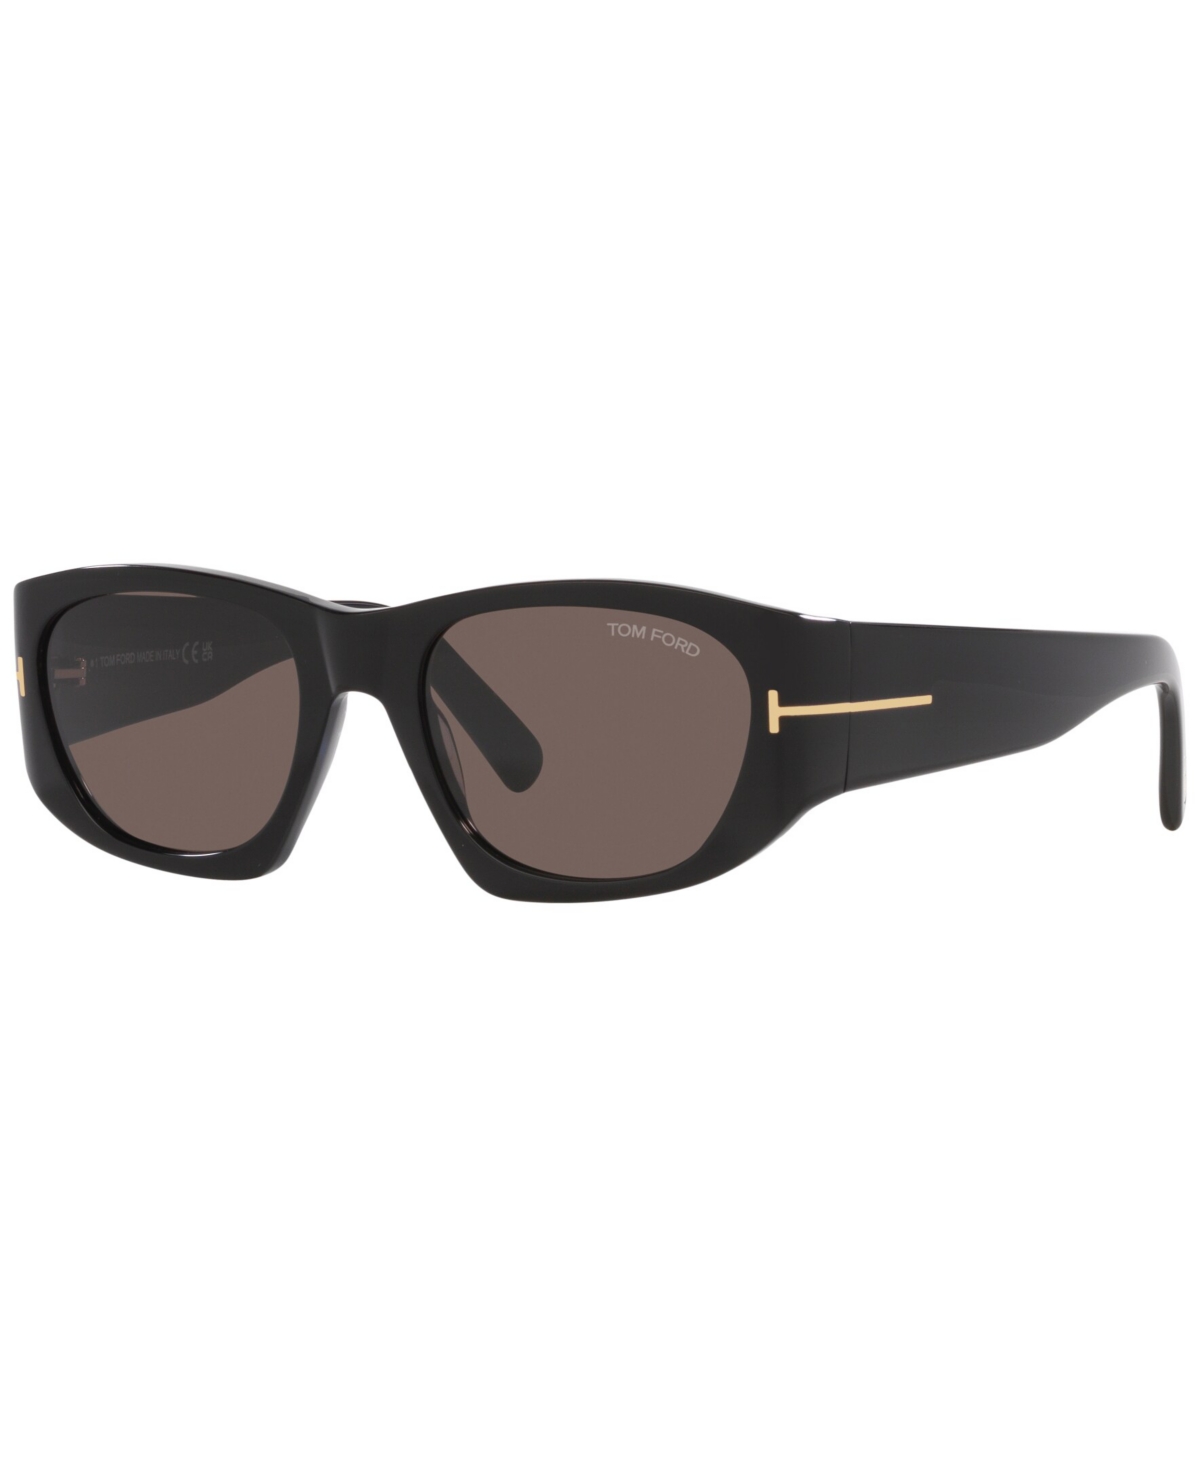 Tom Ford Unisex Sunglasses, Tr001483 In Brown